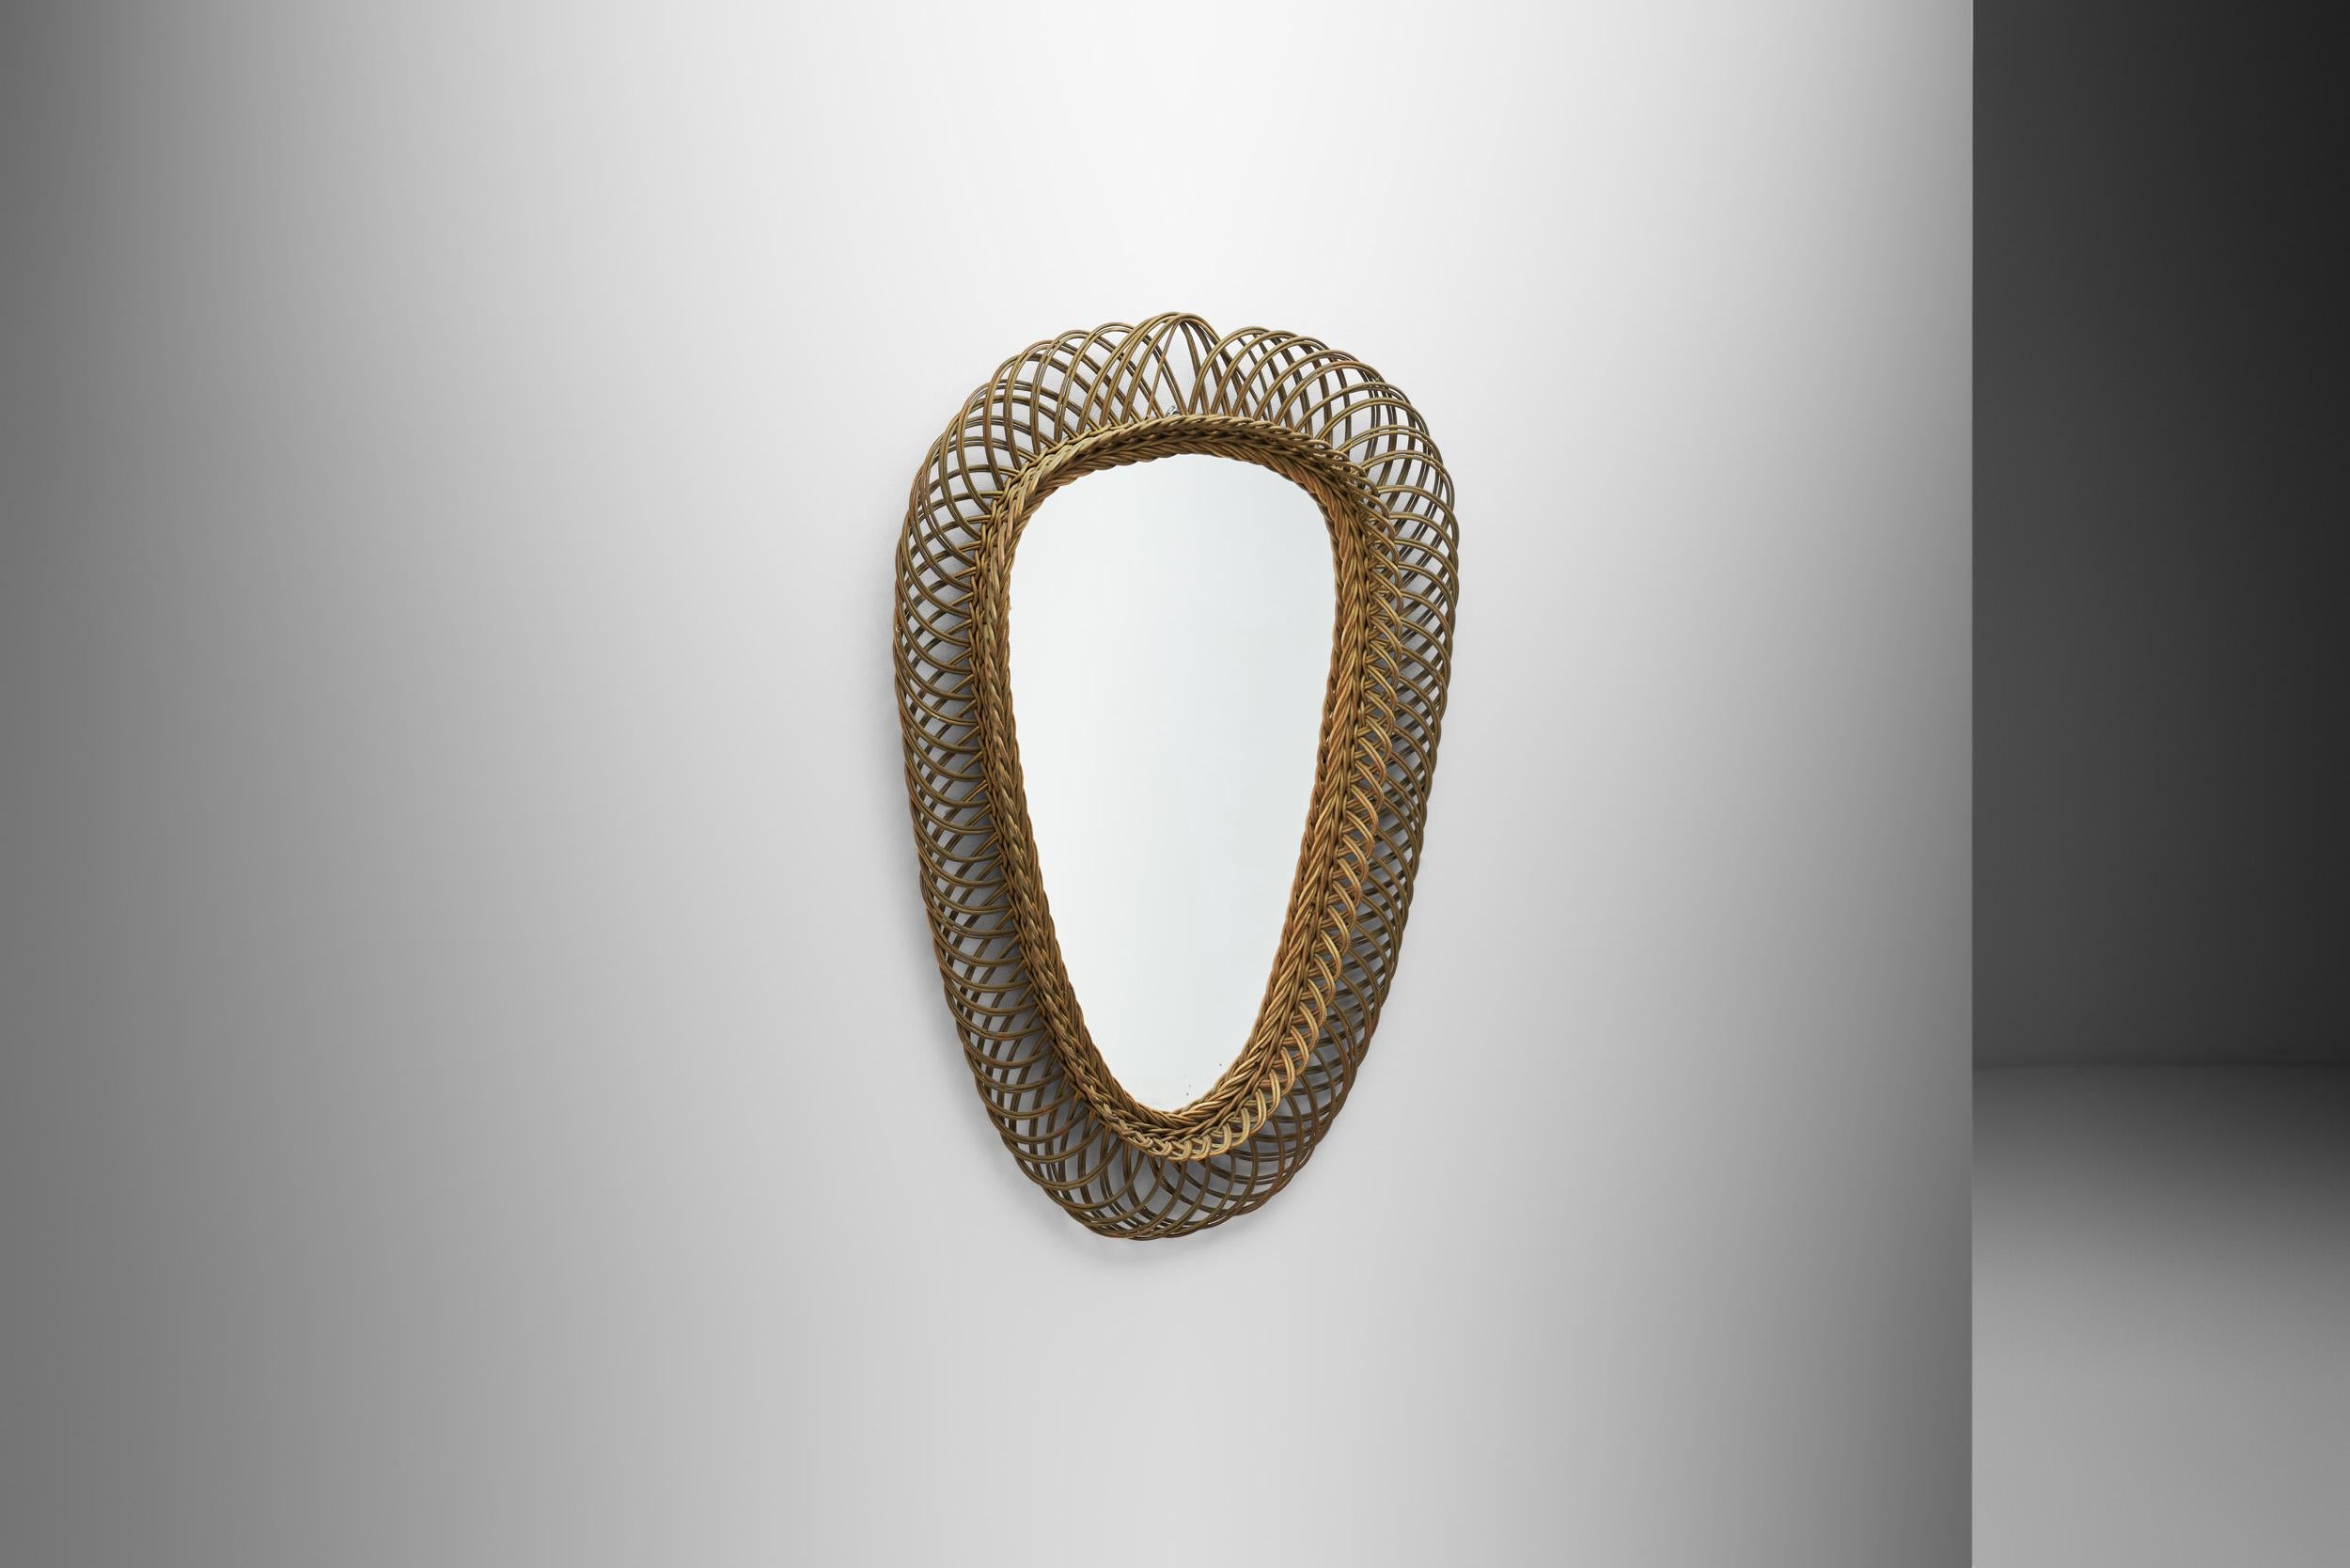 Fusing function and form, accent mirrors offer useful reflection while also providing an eye-catching focal point in any room. This beautiful decorative mirror in the manner of famed Italian designer, Franco Albini, has a light, yet defined look